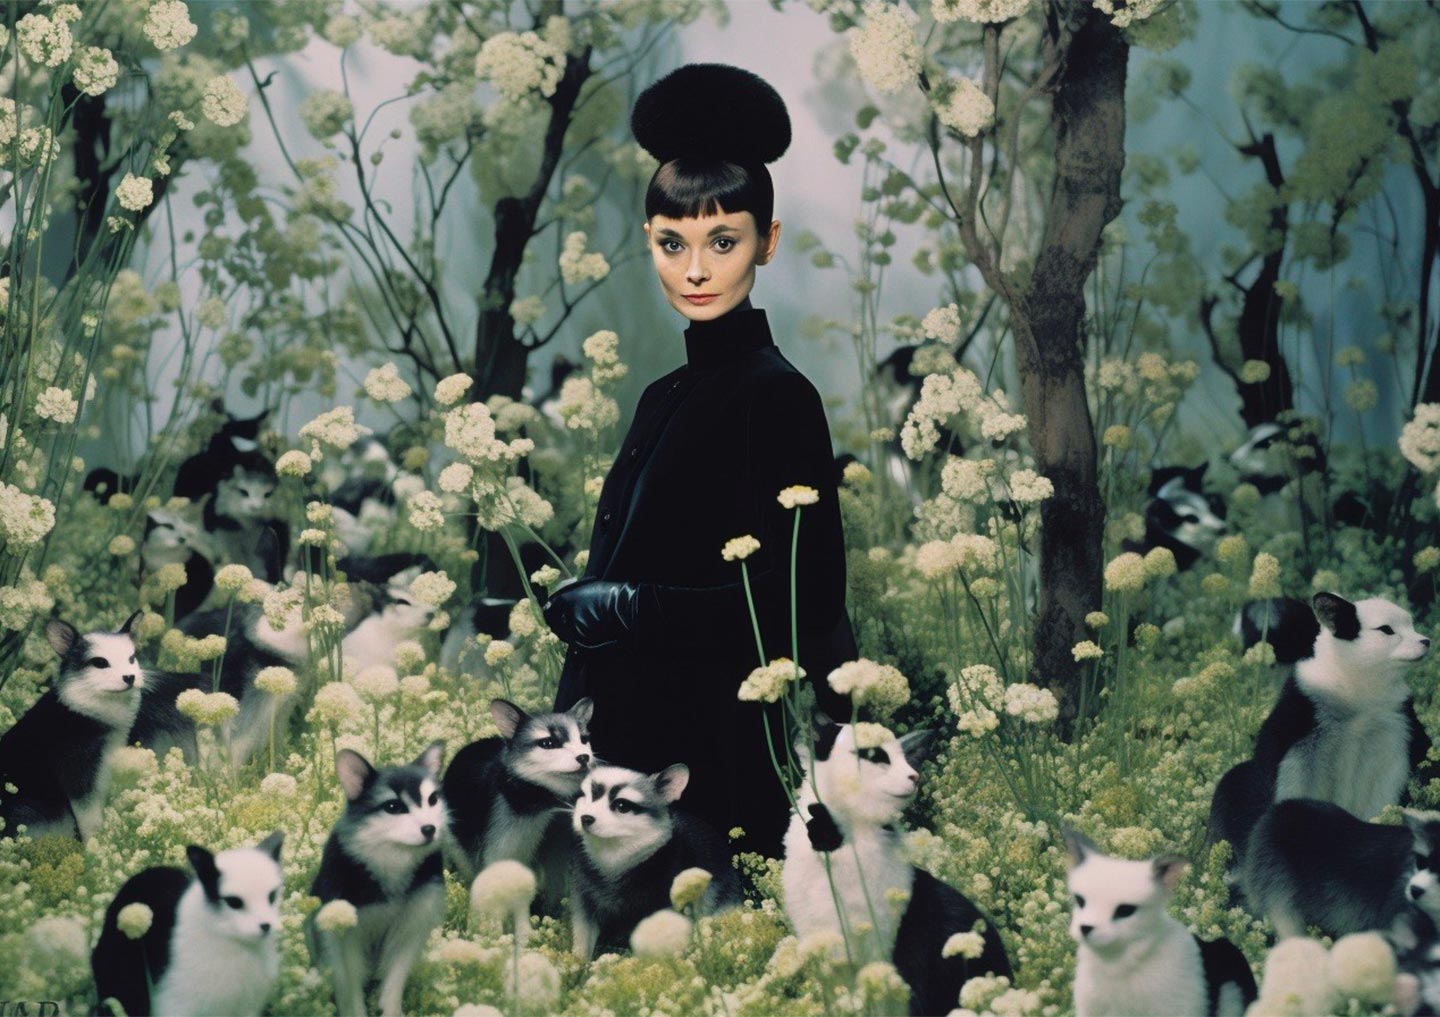 Can you imagine the late Audrey Hepburn as captured by contemporary fashion photographer Tim Walker? Midjourney is ready to give you a visual answer. This tool generates images based on your text prompts thanks to the power of AI and machine learning